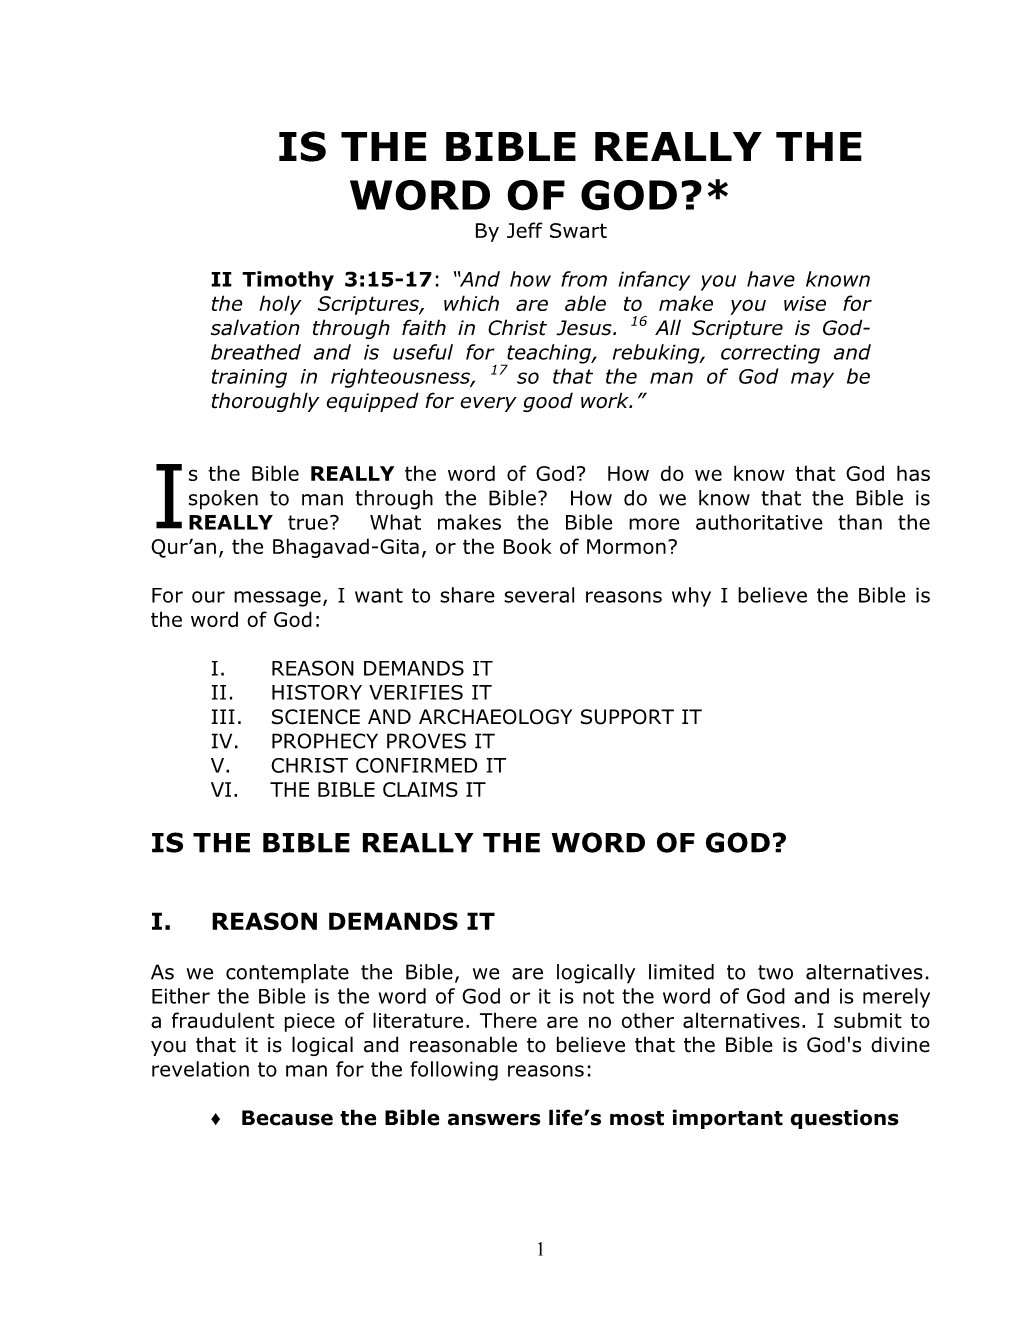 IS the BIBLE REALLY the WORD of GOD?* by Jeff Swart